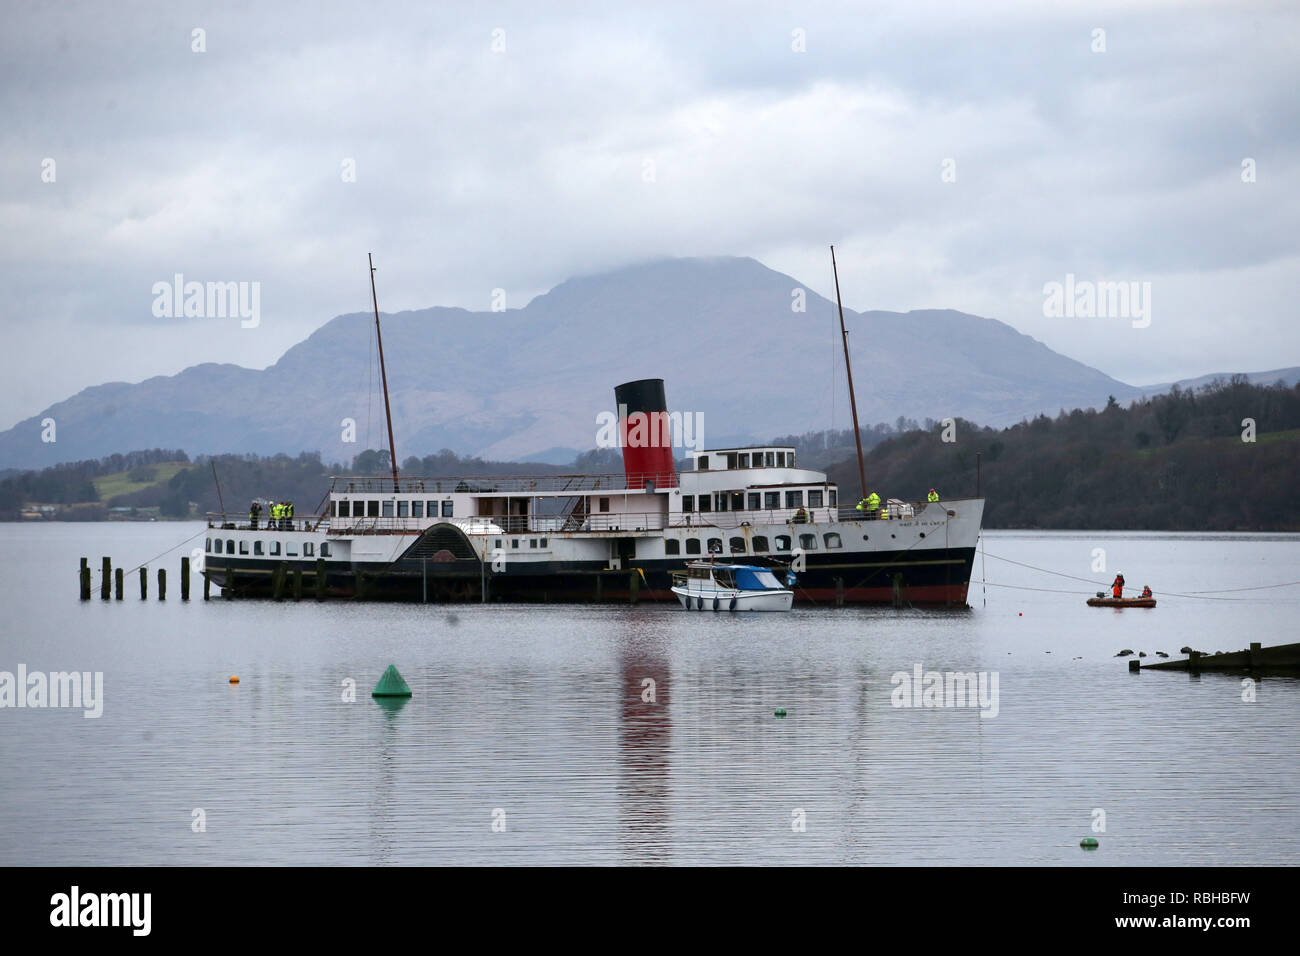 The Maid of the Loch in Loch Lomond before the craddle carrying the vessel snapped during the 'slipping' of the historic steamer as it was being hauled out the water by the original winchhouse and onto the Balloch Steam Slipway, Balloch. Stock Photo